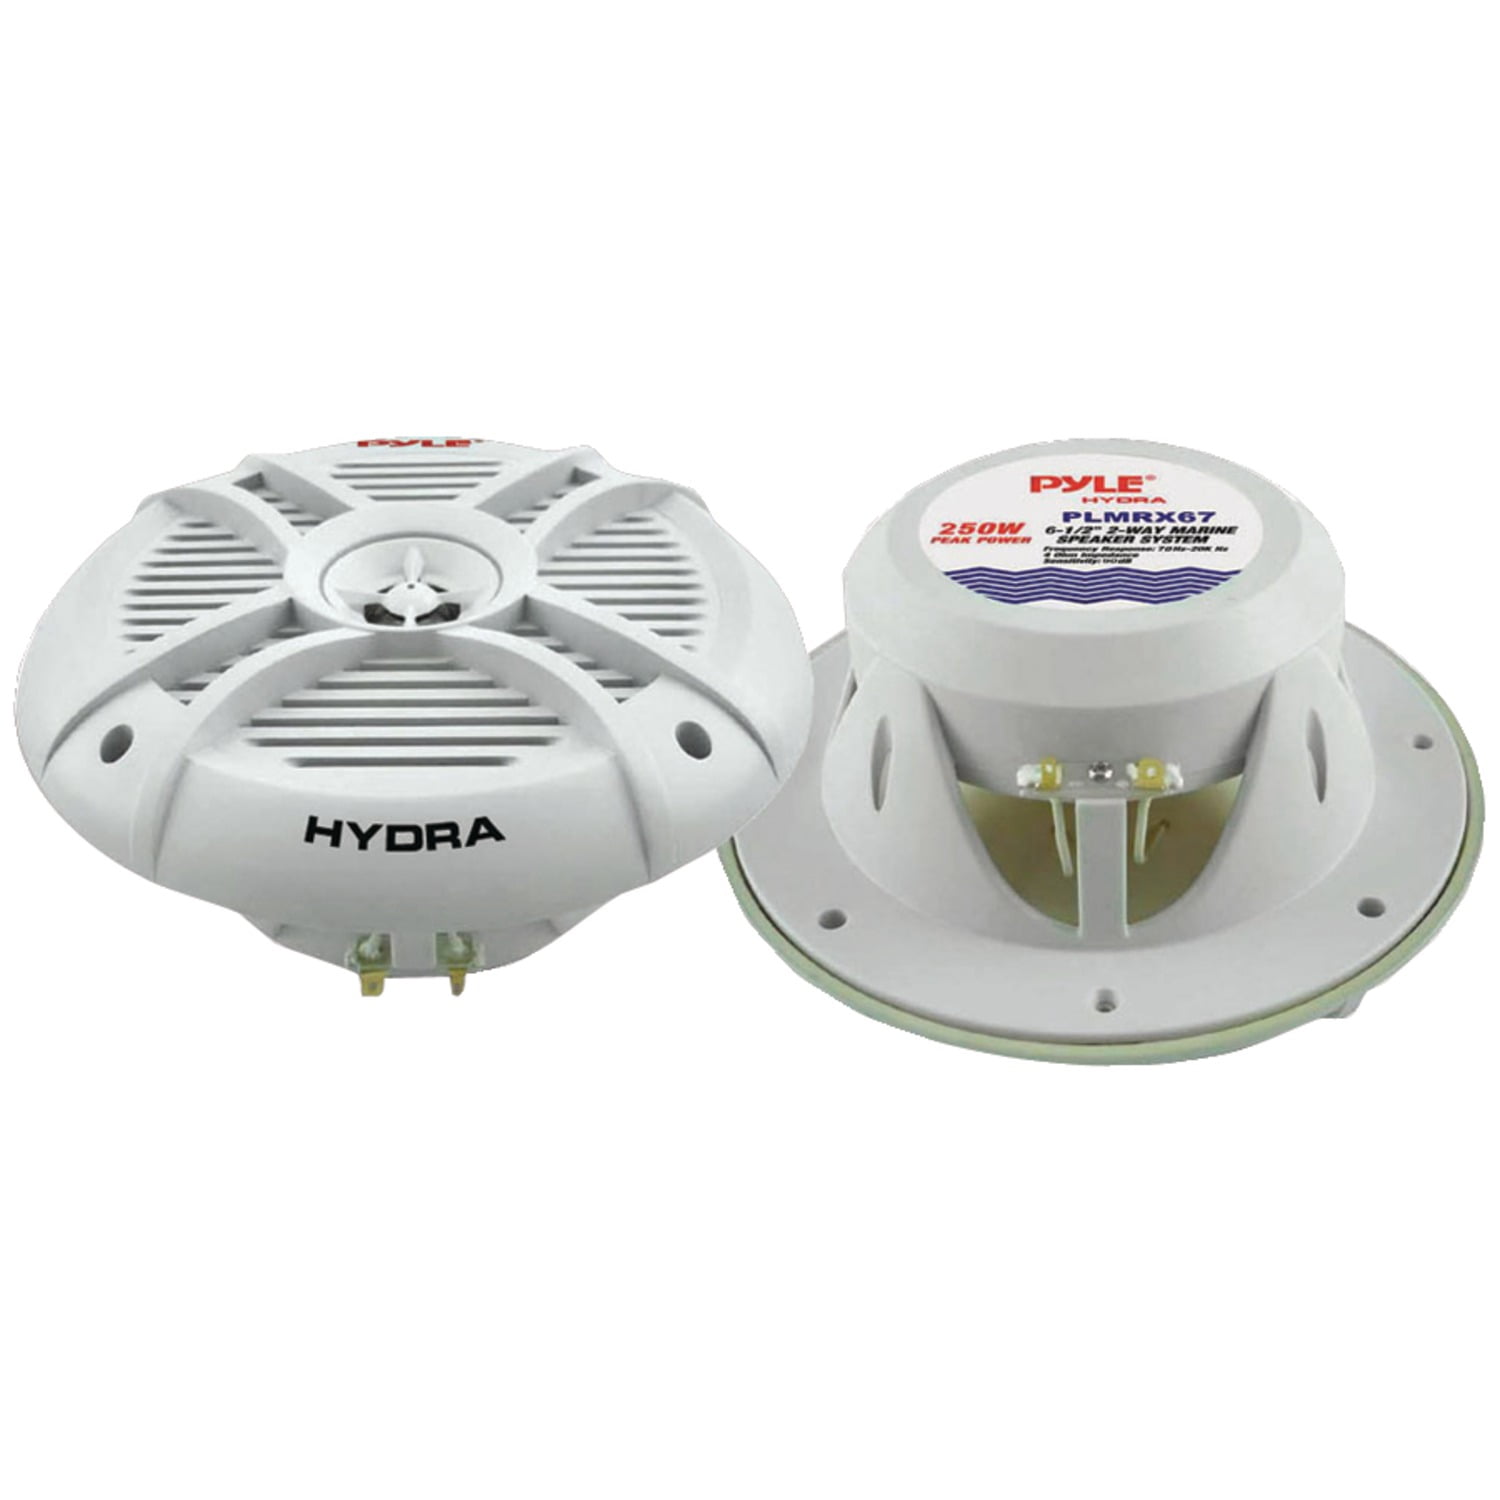 COUPLE OF LOUDSPEAKERS PLMRX67 IN STREETS PYLE PLMRX67 WHITE 500 WATT MAX  16,5 CM 6.5" IMPERMEABLE RESISTANT TO THE WATER EXCELLENT FOR SWIMMING POO 